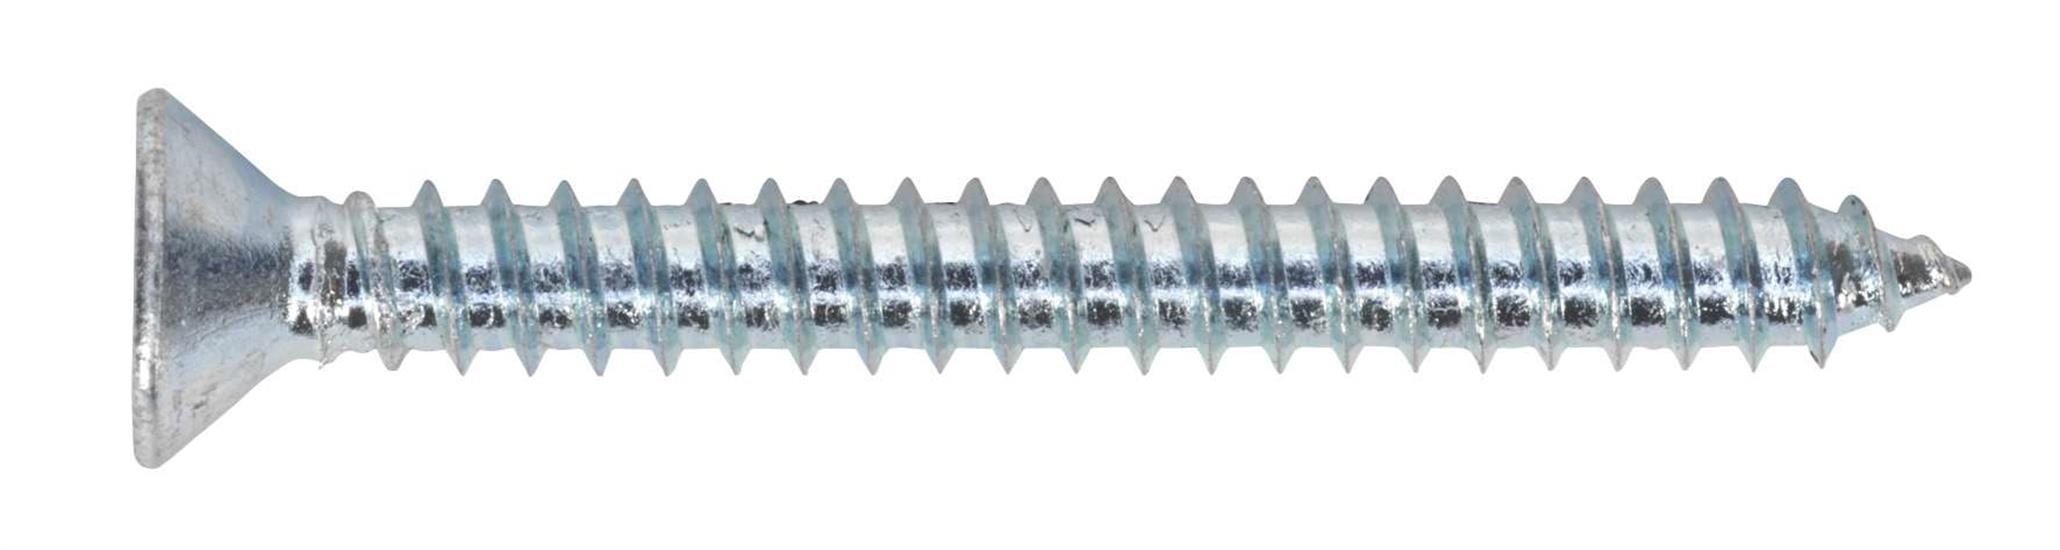 Sealey ST4238 - Self Tapping Screw 4.2 x 38mm Countersunk Pozi DIN 7982 Pack of 100